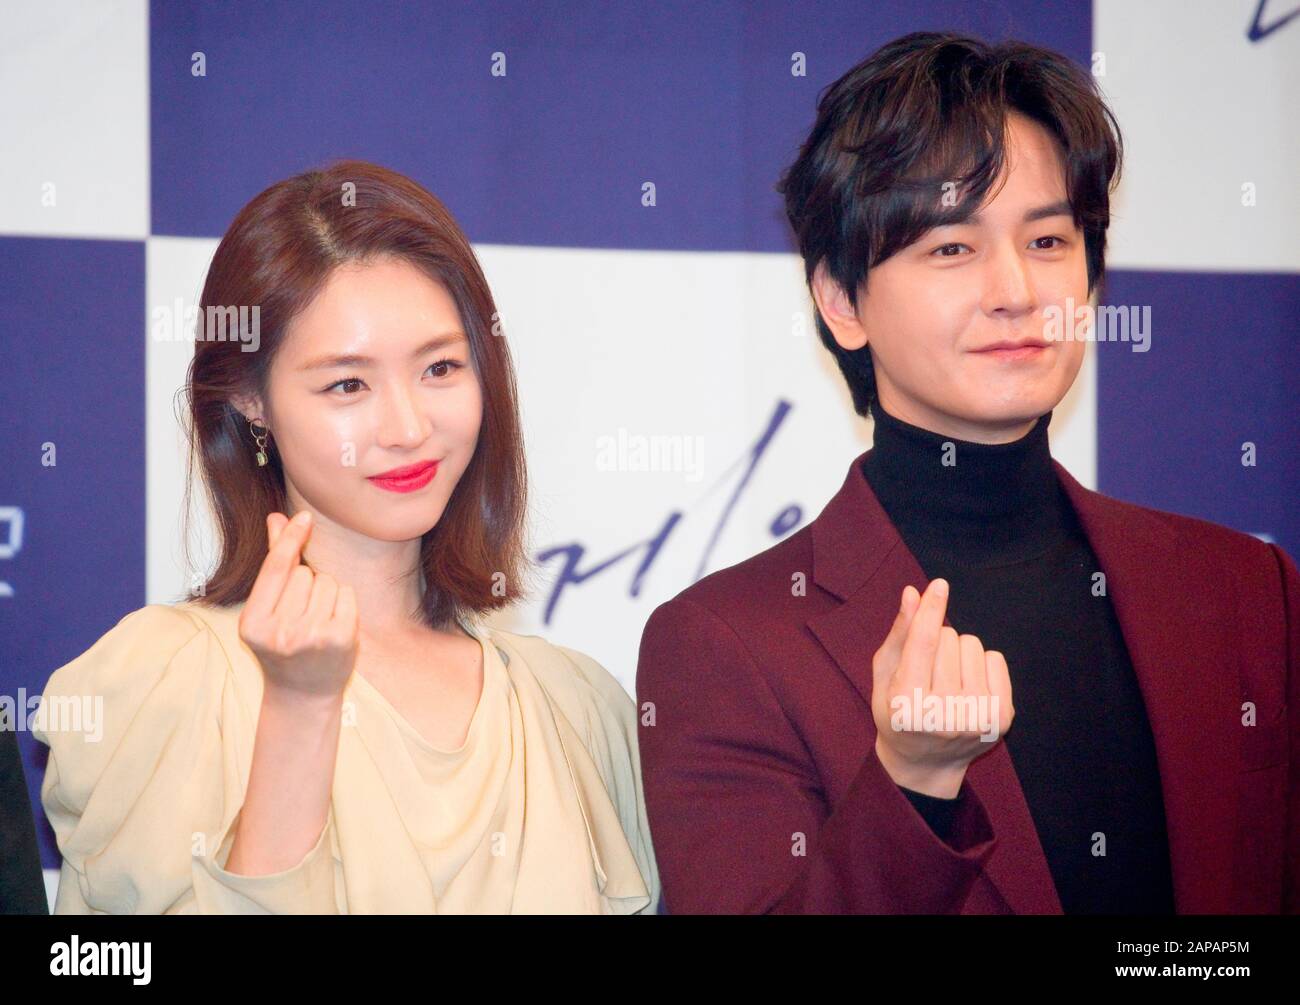 Lim Ju-Hwan and Lee Yeon-Hee, Jan 22, 2020 : South Korean actor Lim Ju-Hwan (R) and actress Lee Yeon-Hee attend a press conference for new MBC drama 'The Game: Towards Zero' at the Munhwa Broadcasting Corporation (MBC) in Seoul, South Korea. (Photo by Lee Jae-Won/AFLO) (SOUTH KOREA) Stock Photo